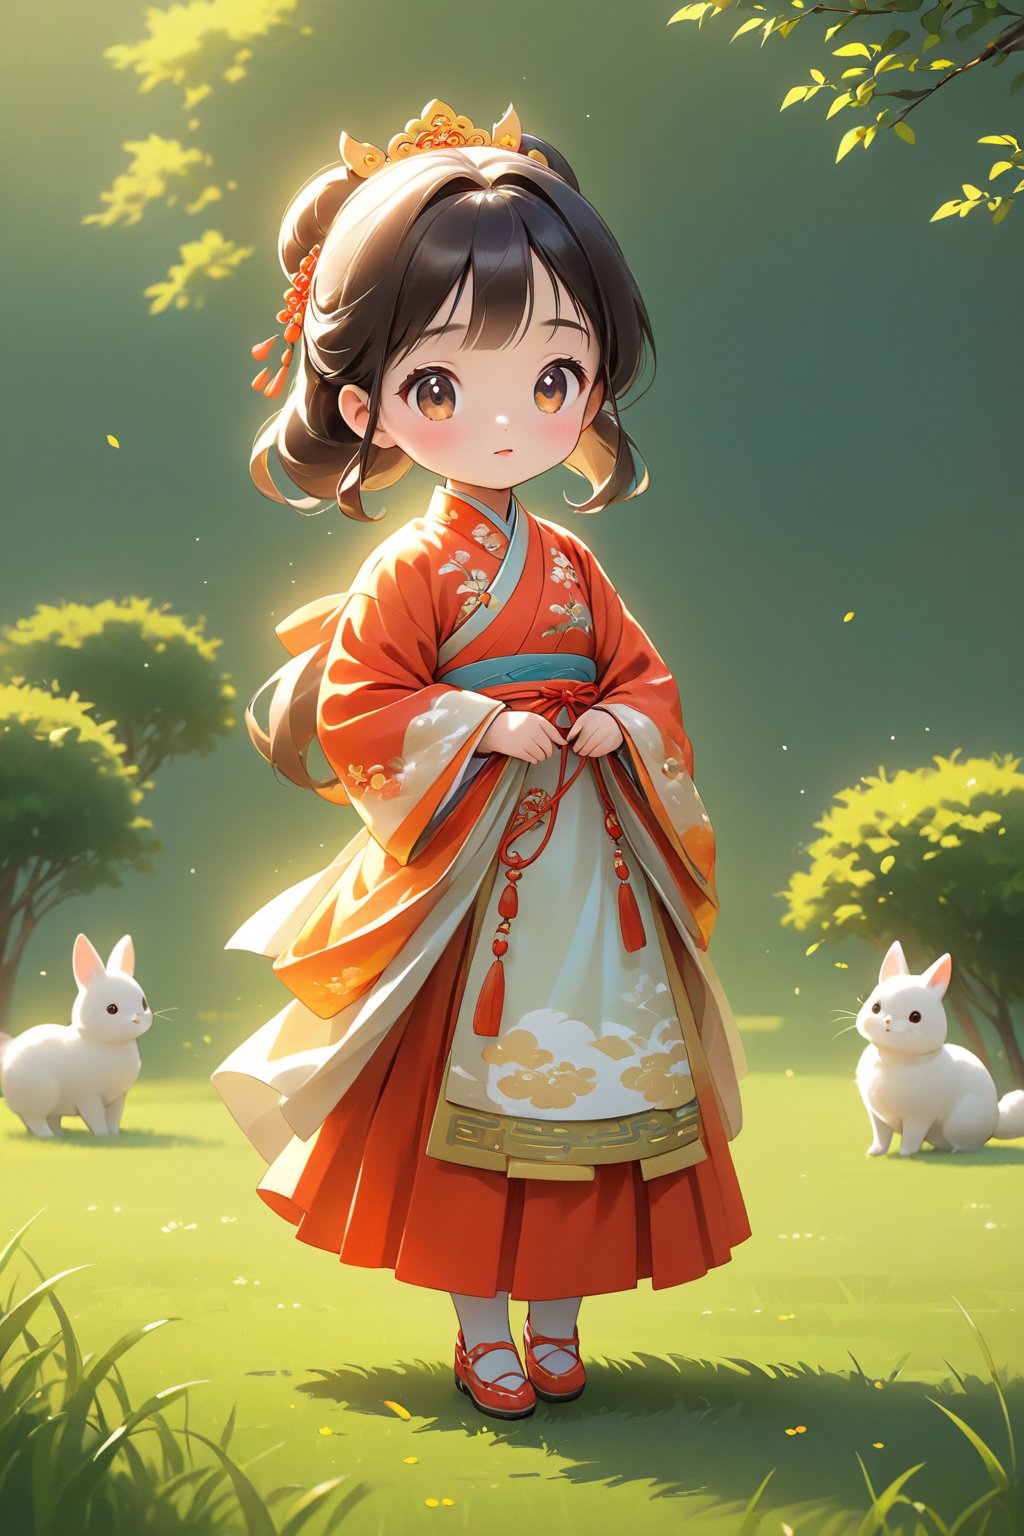 Children's Q version，Q version  standing on the grass，lovely digital painting, Clean background cute digital art, Cute detailed digital art, Cute cartoon character, Beautiful character painting, Chinese girl, Realistic cute girl painting, Beautiful digital artwork, Palace ， A girl in Hanfu, cute character, Cute cartoon, digital cartoon painting art, Guviz-style artwork